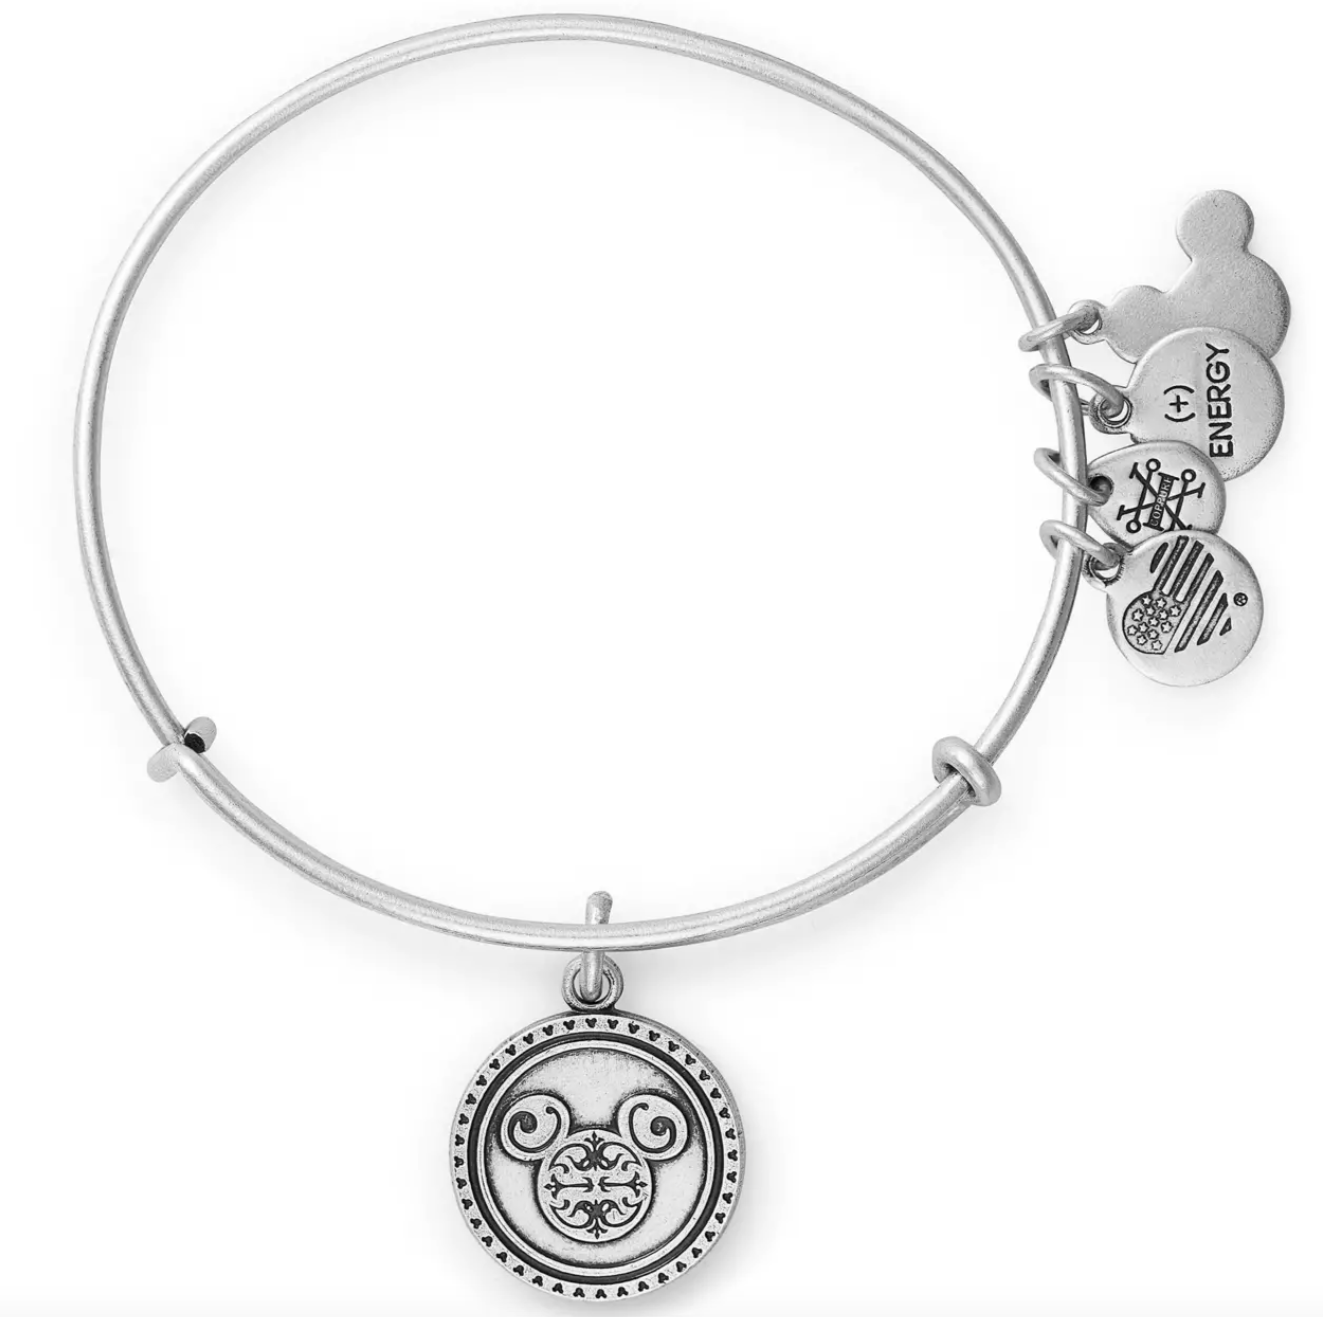 NEW Disney Alex and Ani Bracelets are Now Available Online! | the ...